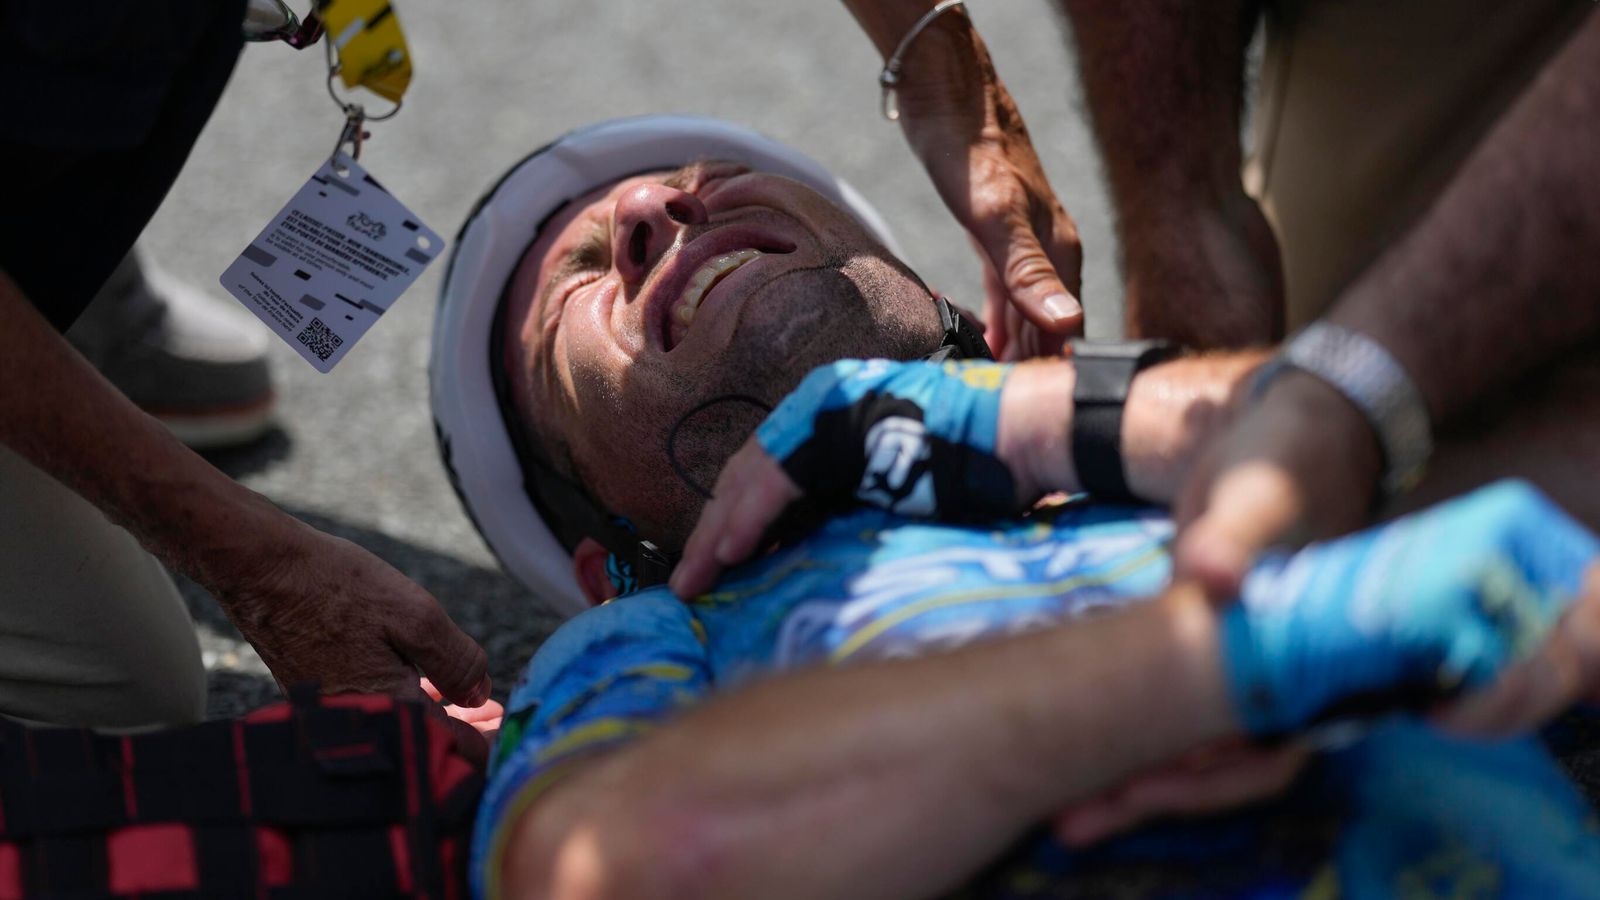 Mark Cavendish crashes out of final Tour de France on stage eight with broken collarbone